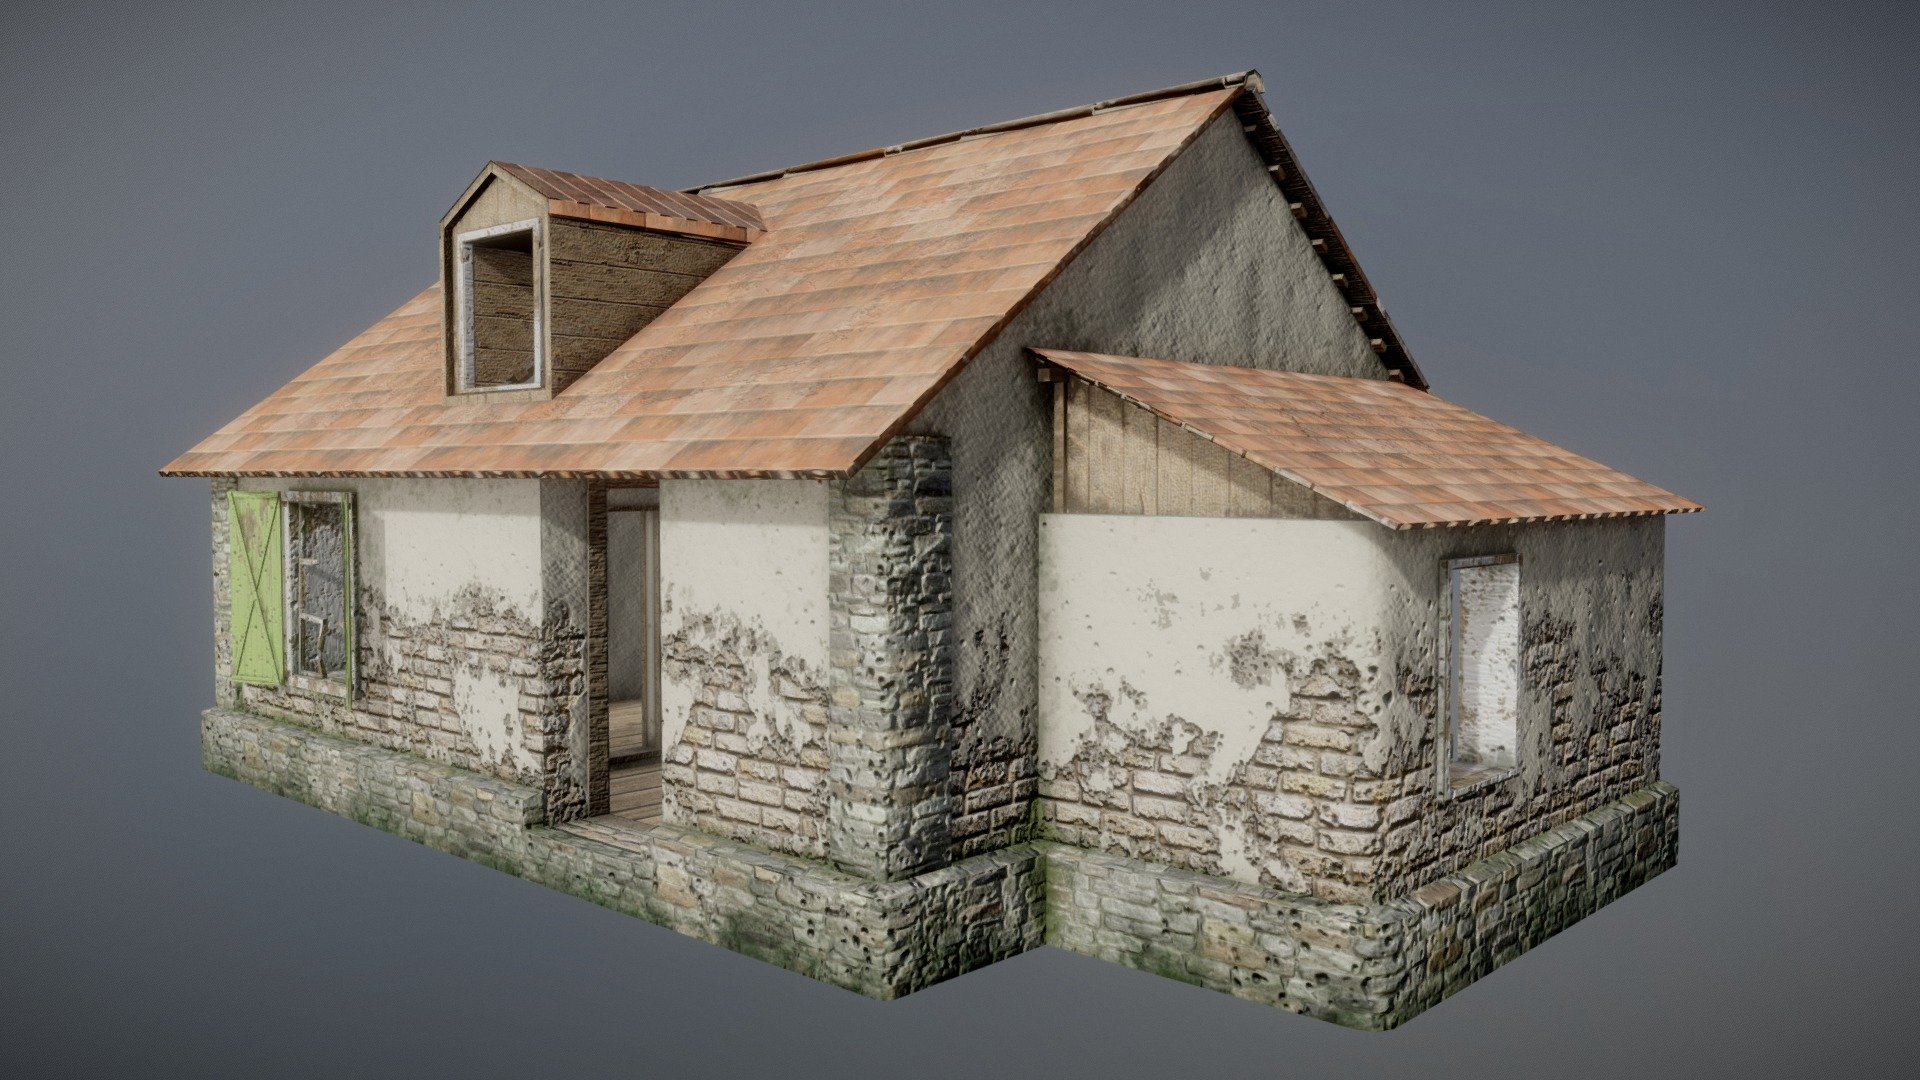 House located in the center of the battlefield. Comes in 3 colours of walls and 3 types of roofing, but only one combination displayed here.

Part of Weltkrieg 1 - mobile game about WW1 to be released soon 3d model